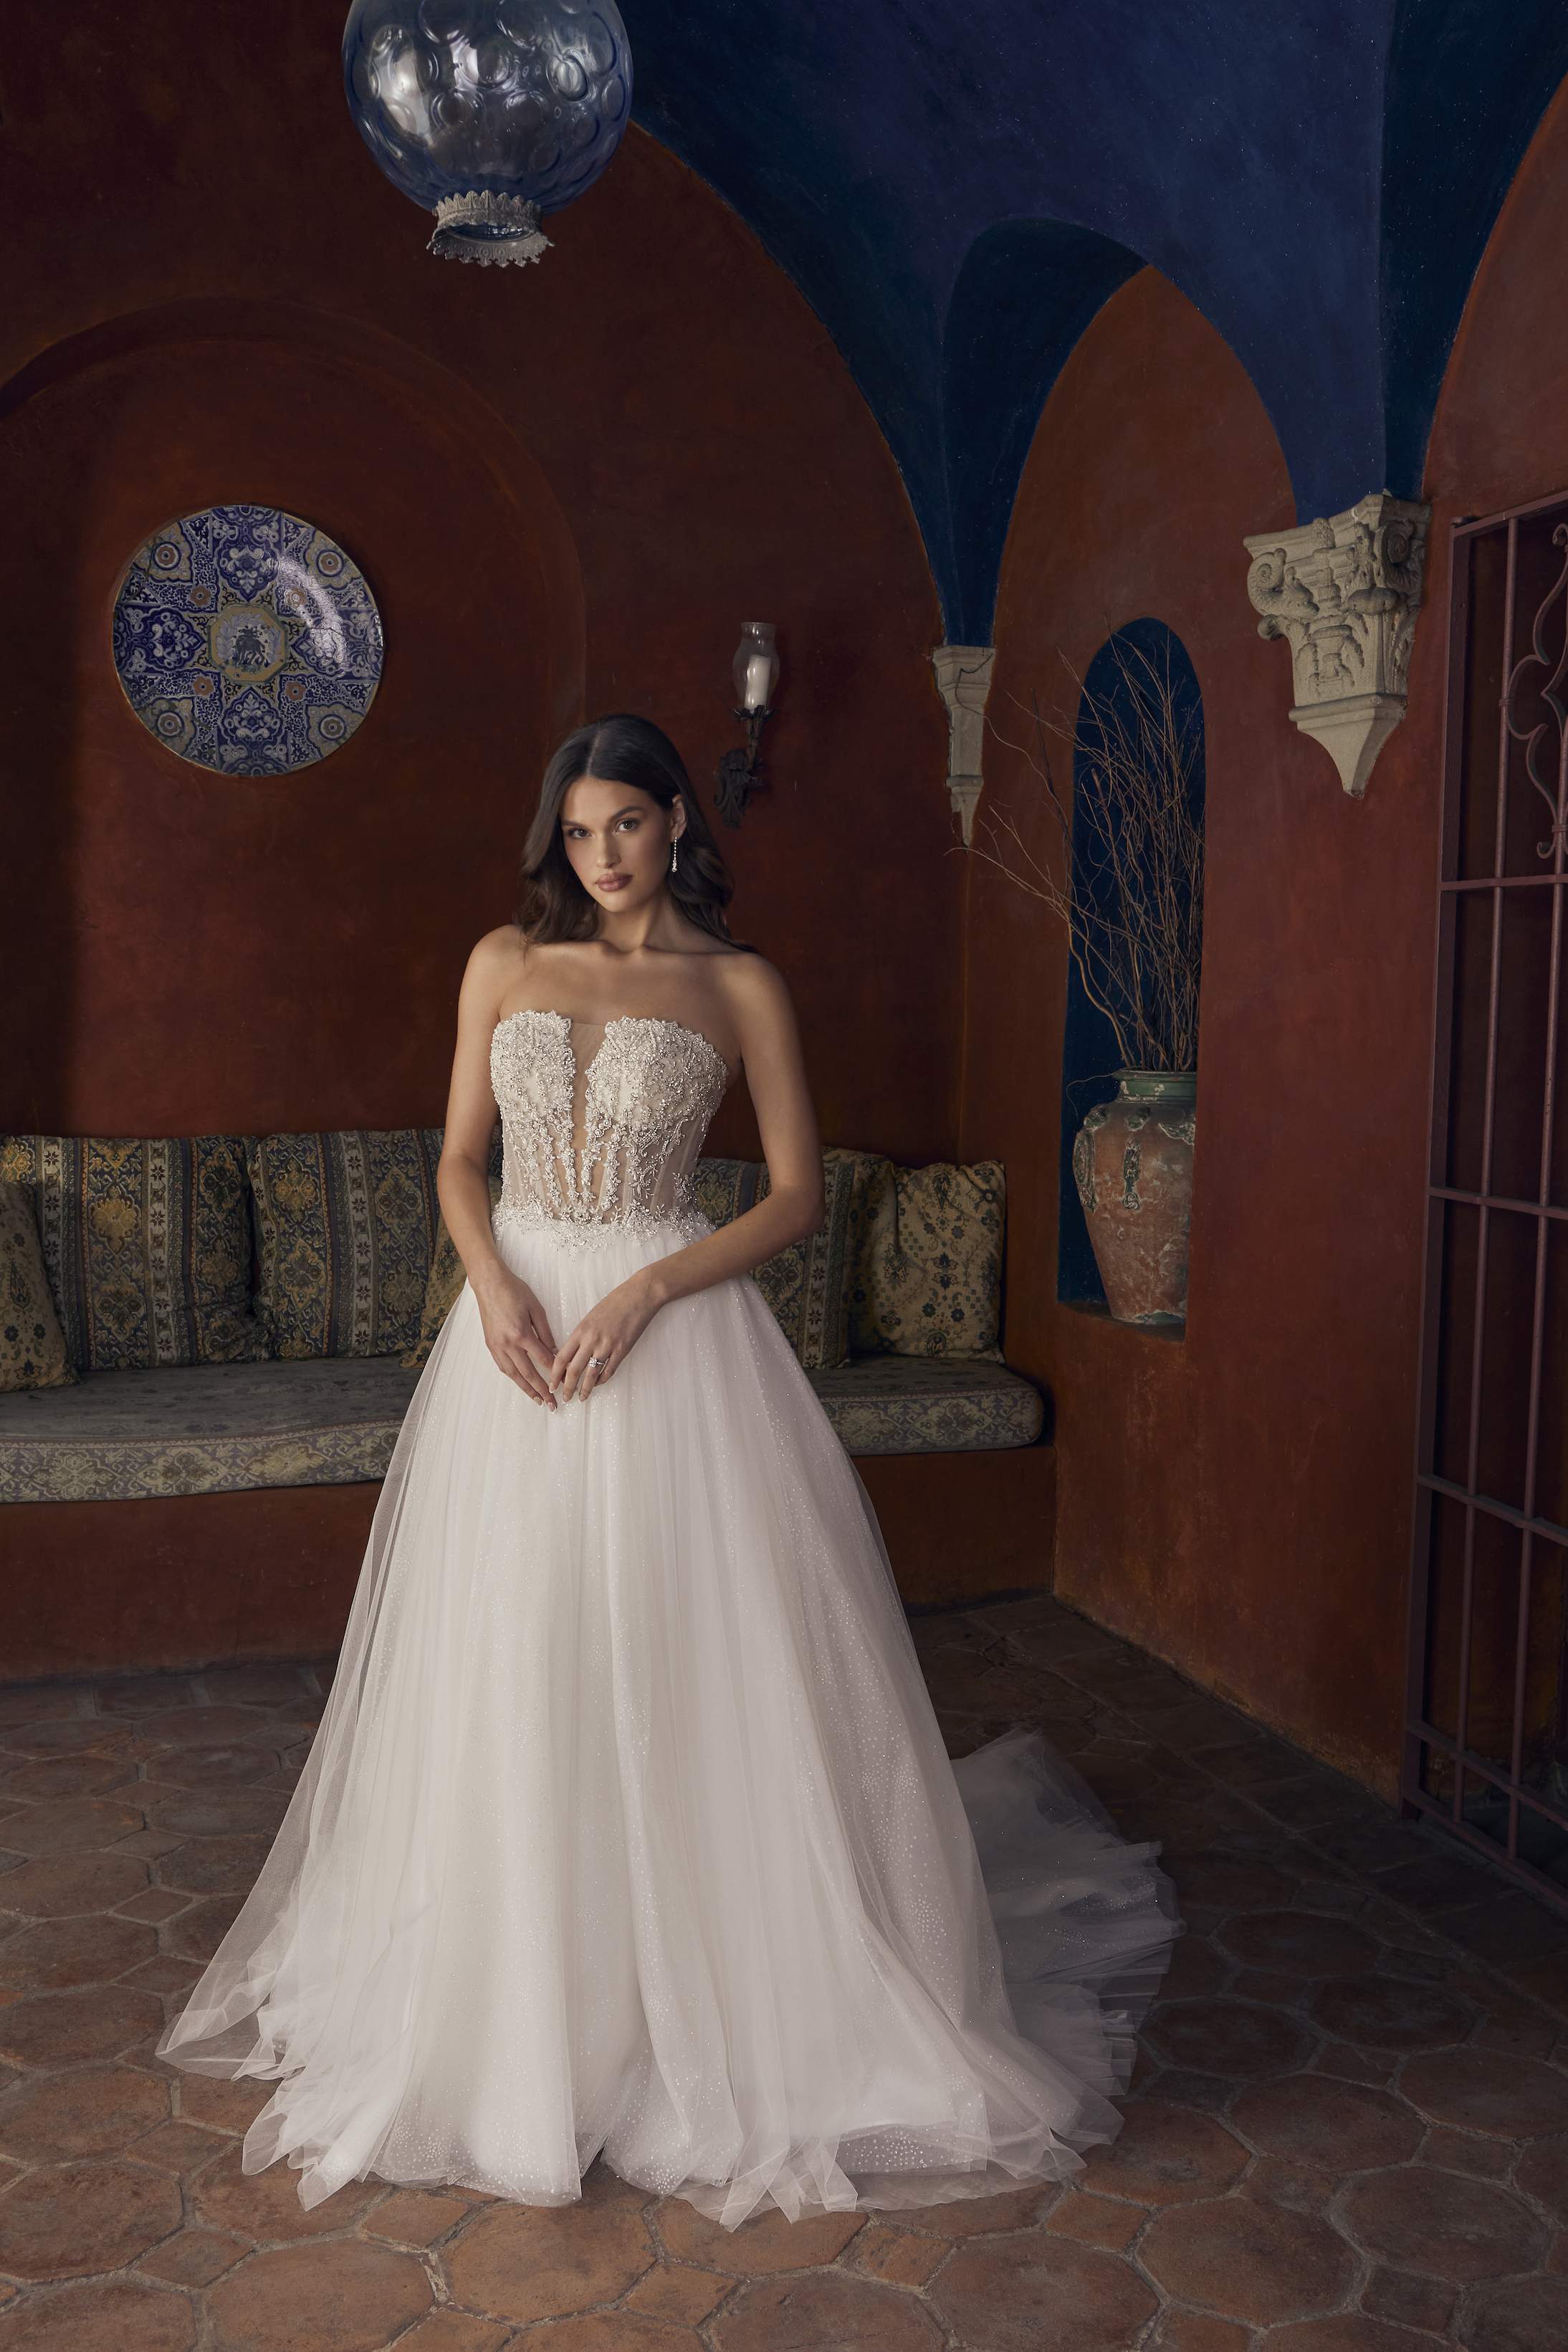 Casablanca Bridal’s Spring 2024 Is Giving Timeless Glam by Wedding Chicks